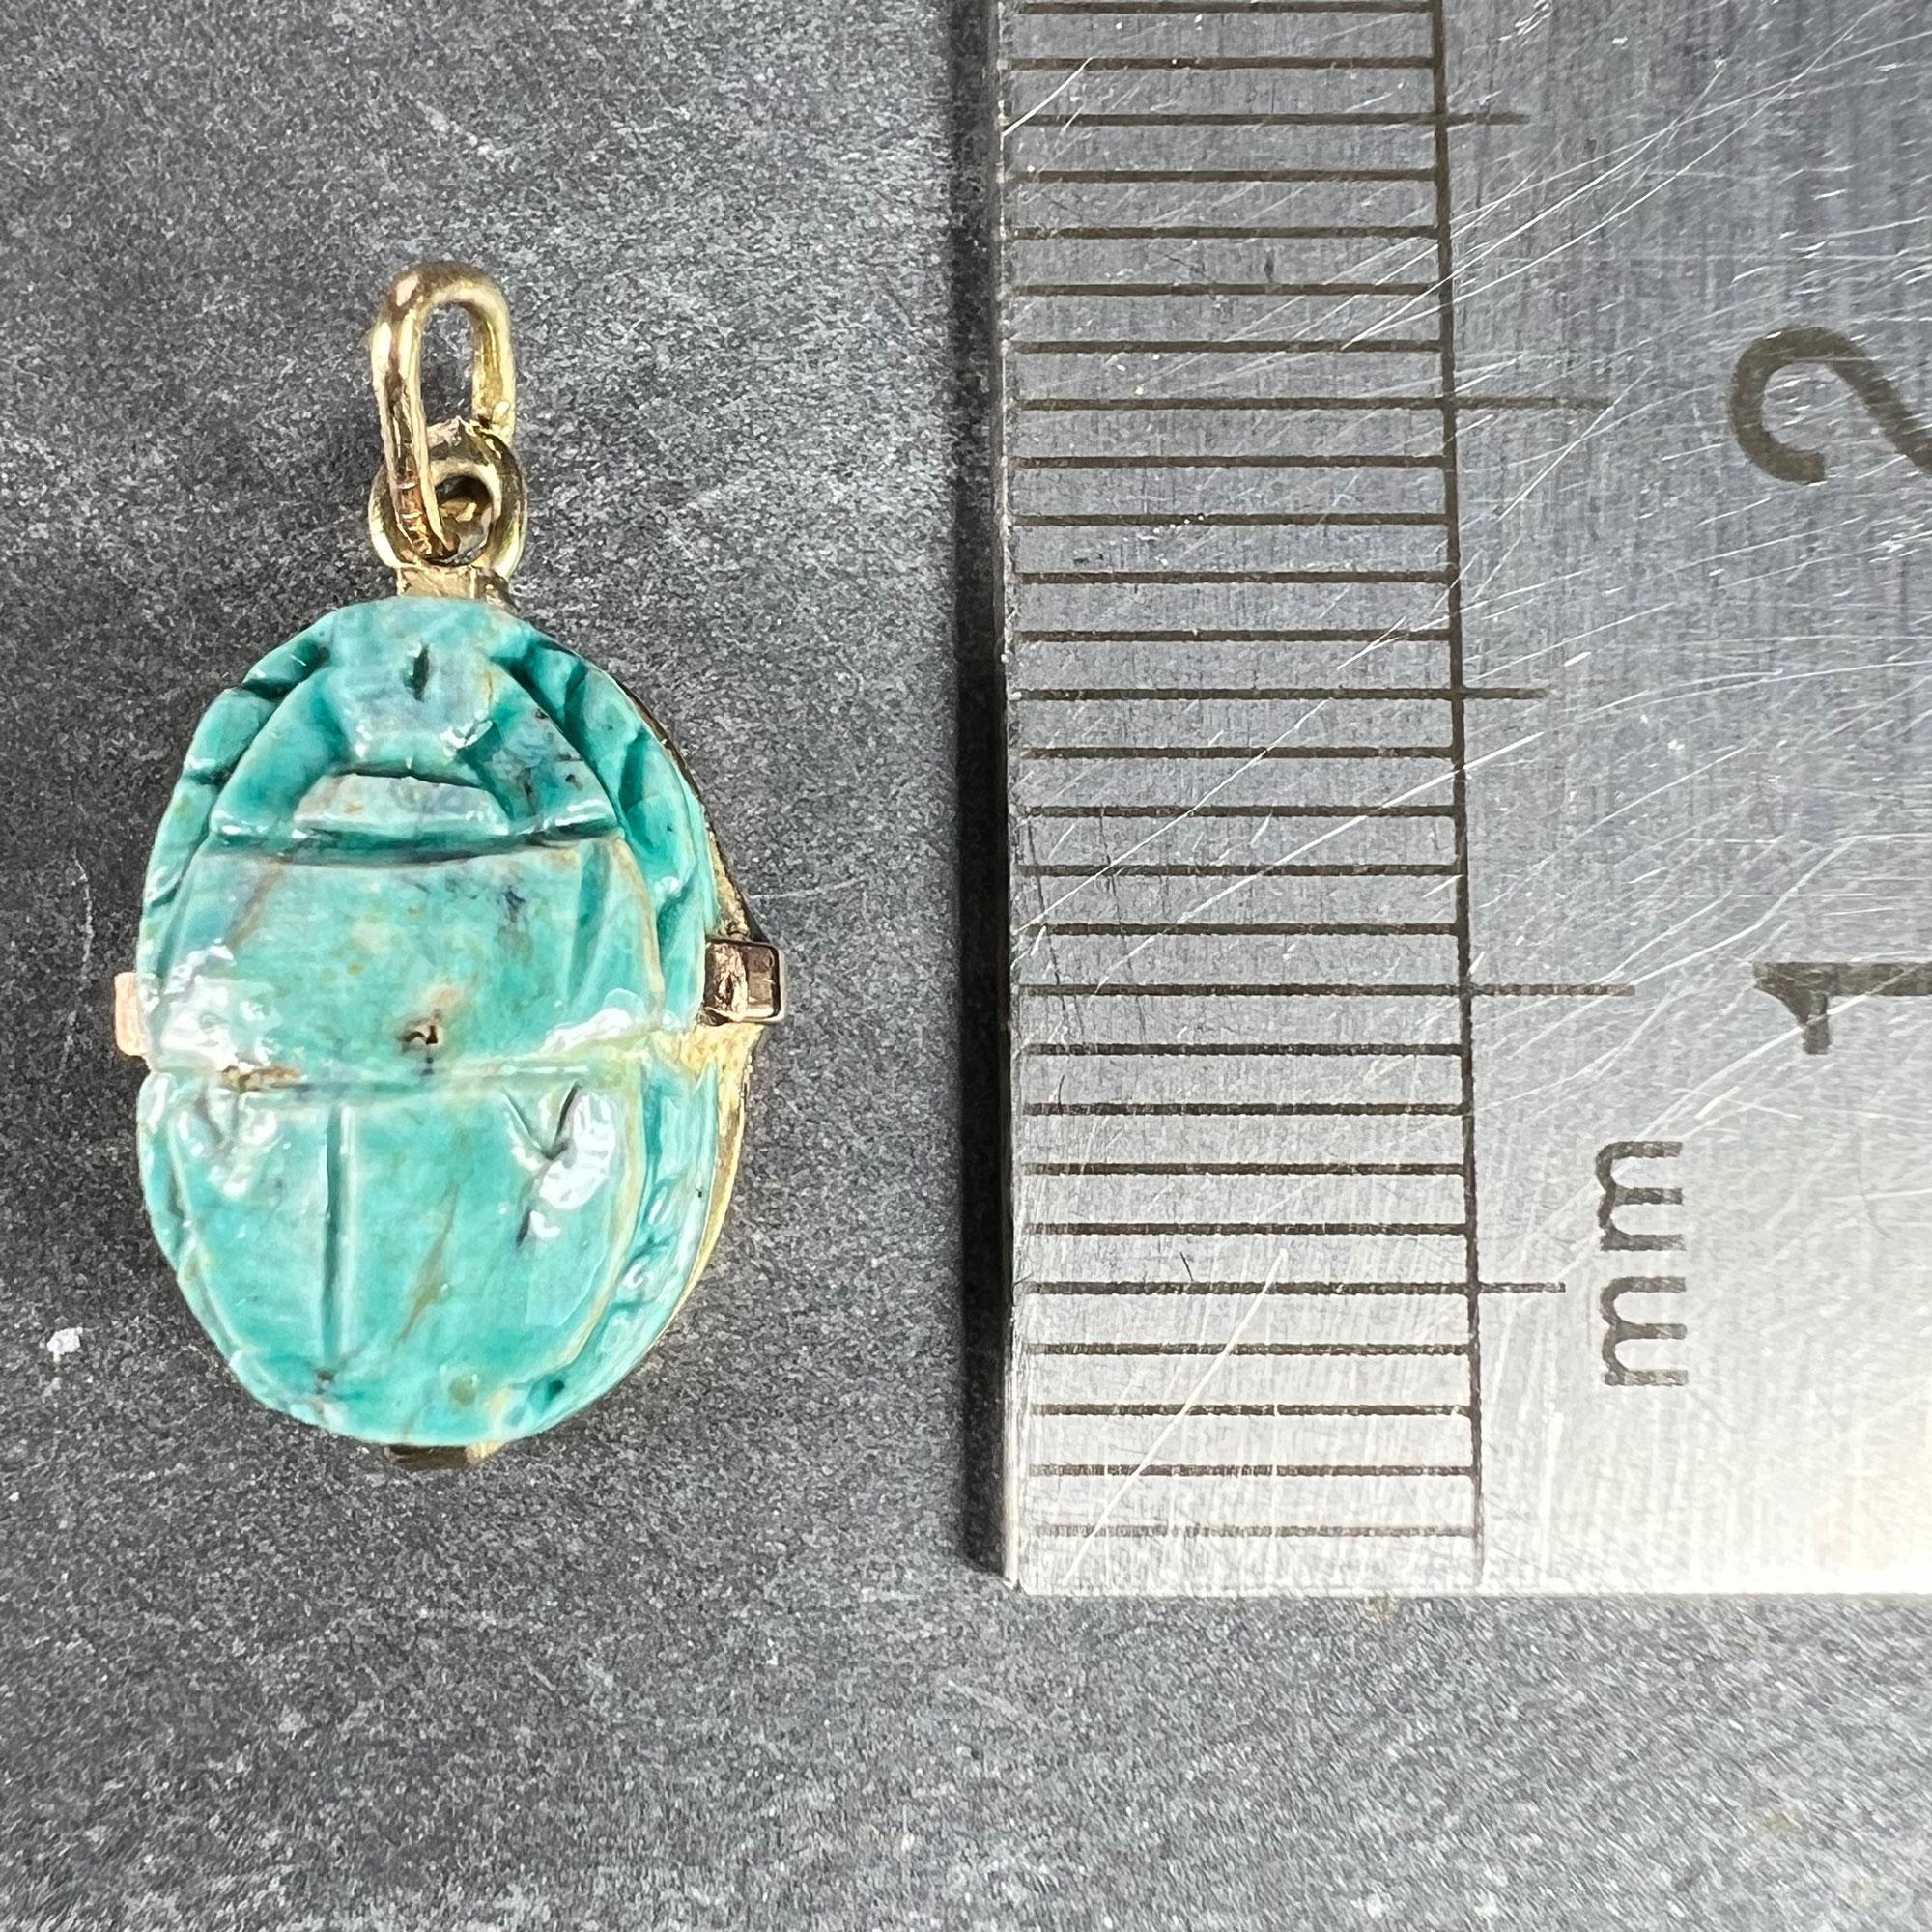 Egyptian Faience Ceramic Scarab 18K Yellow Gold Charm Pendant For Sale 6